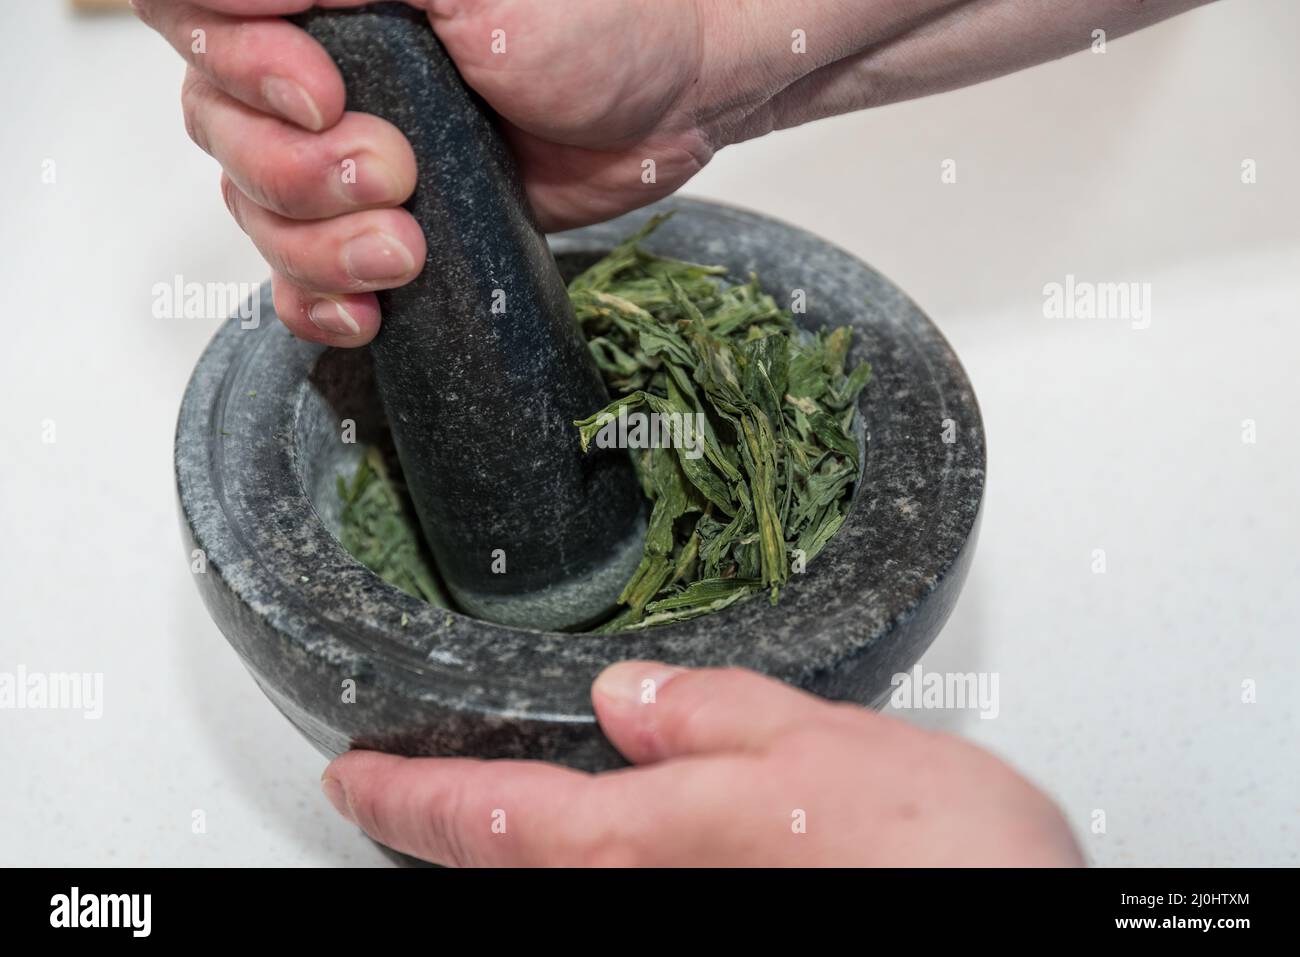 Grind wild garlic in a mortar with pestle - close-up of medicinal herbs Stock Photo